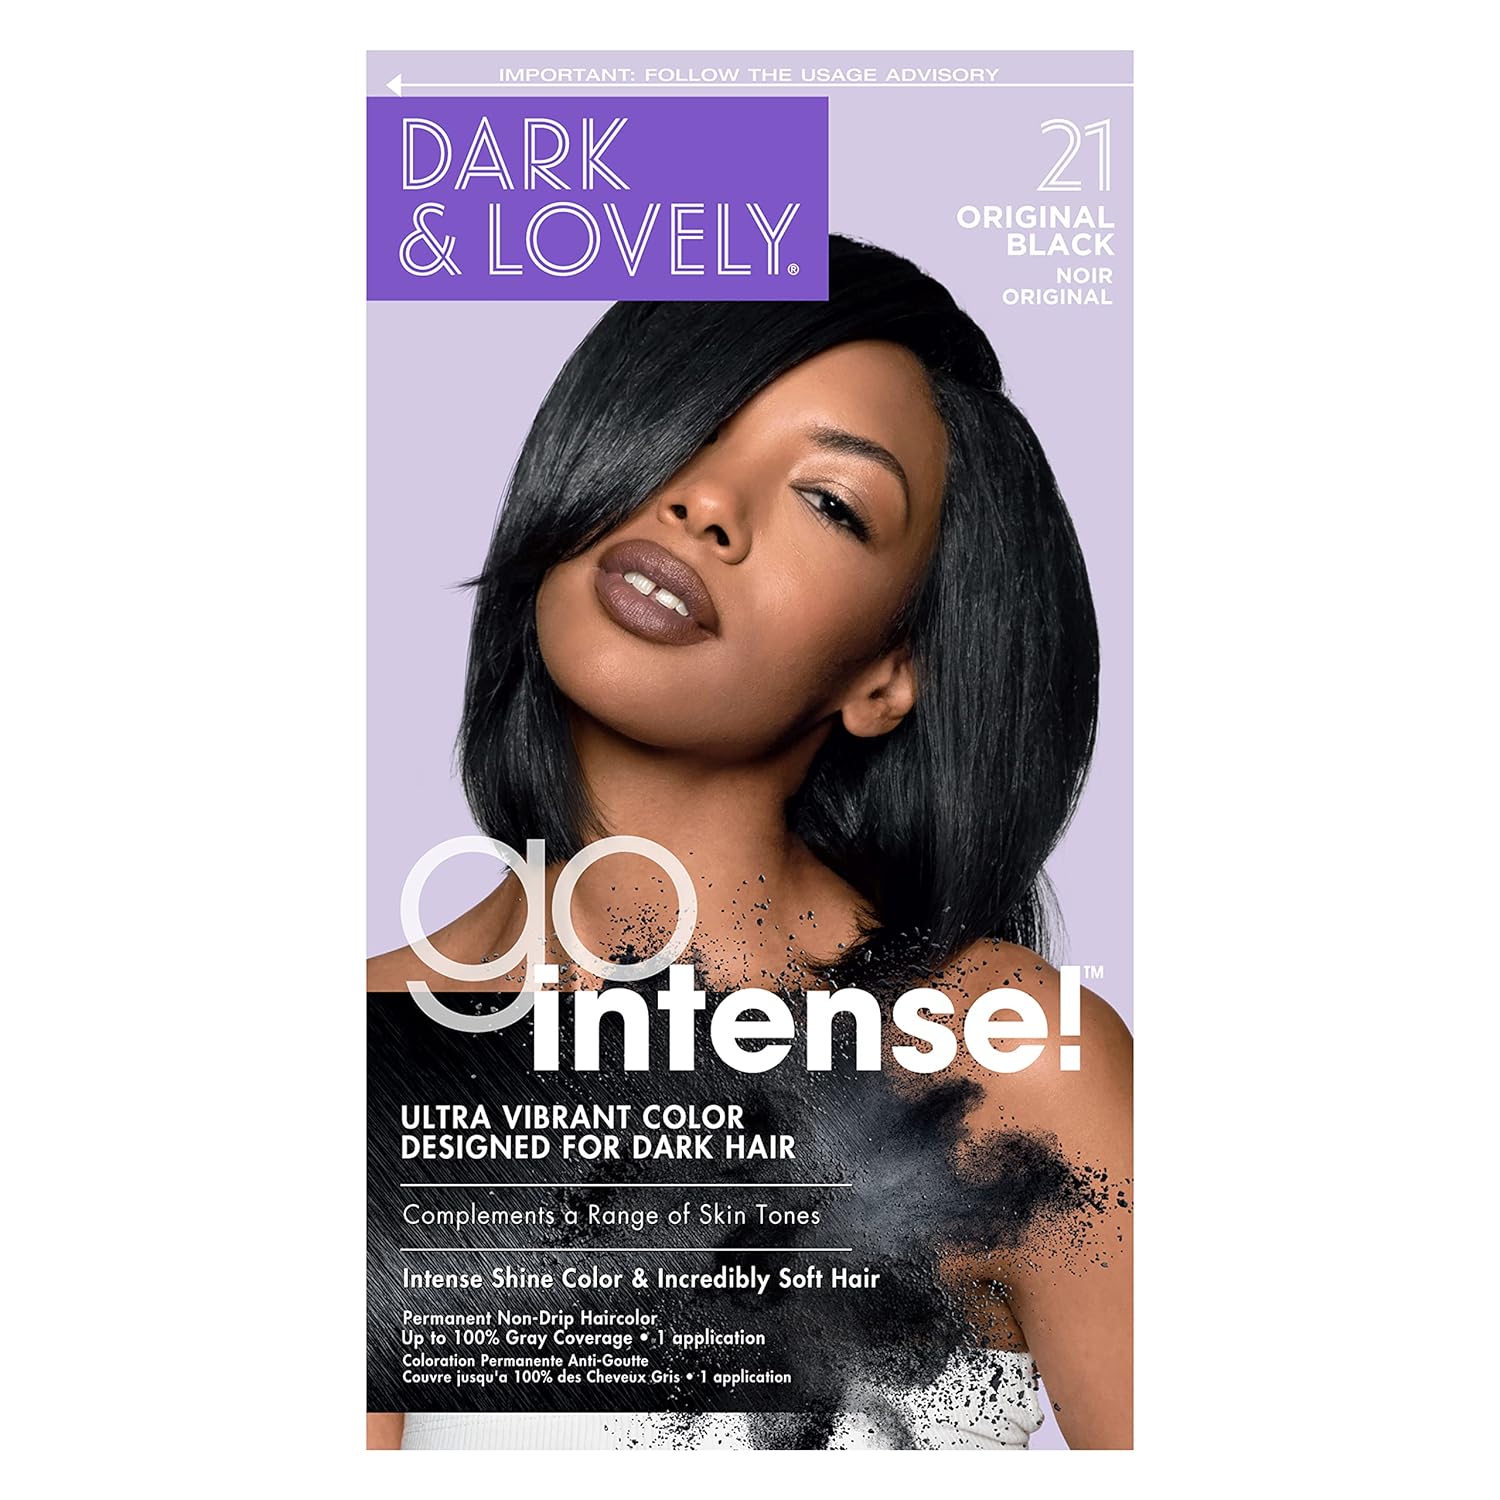 SoftSheen-Carson Dark and Lovely Ultra Vibrant Permanent Hair Color Go Intense Hair Dye for Dark Hair with Olive Oil for Shine and Softness, Original Black